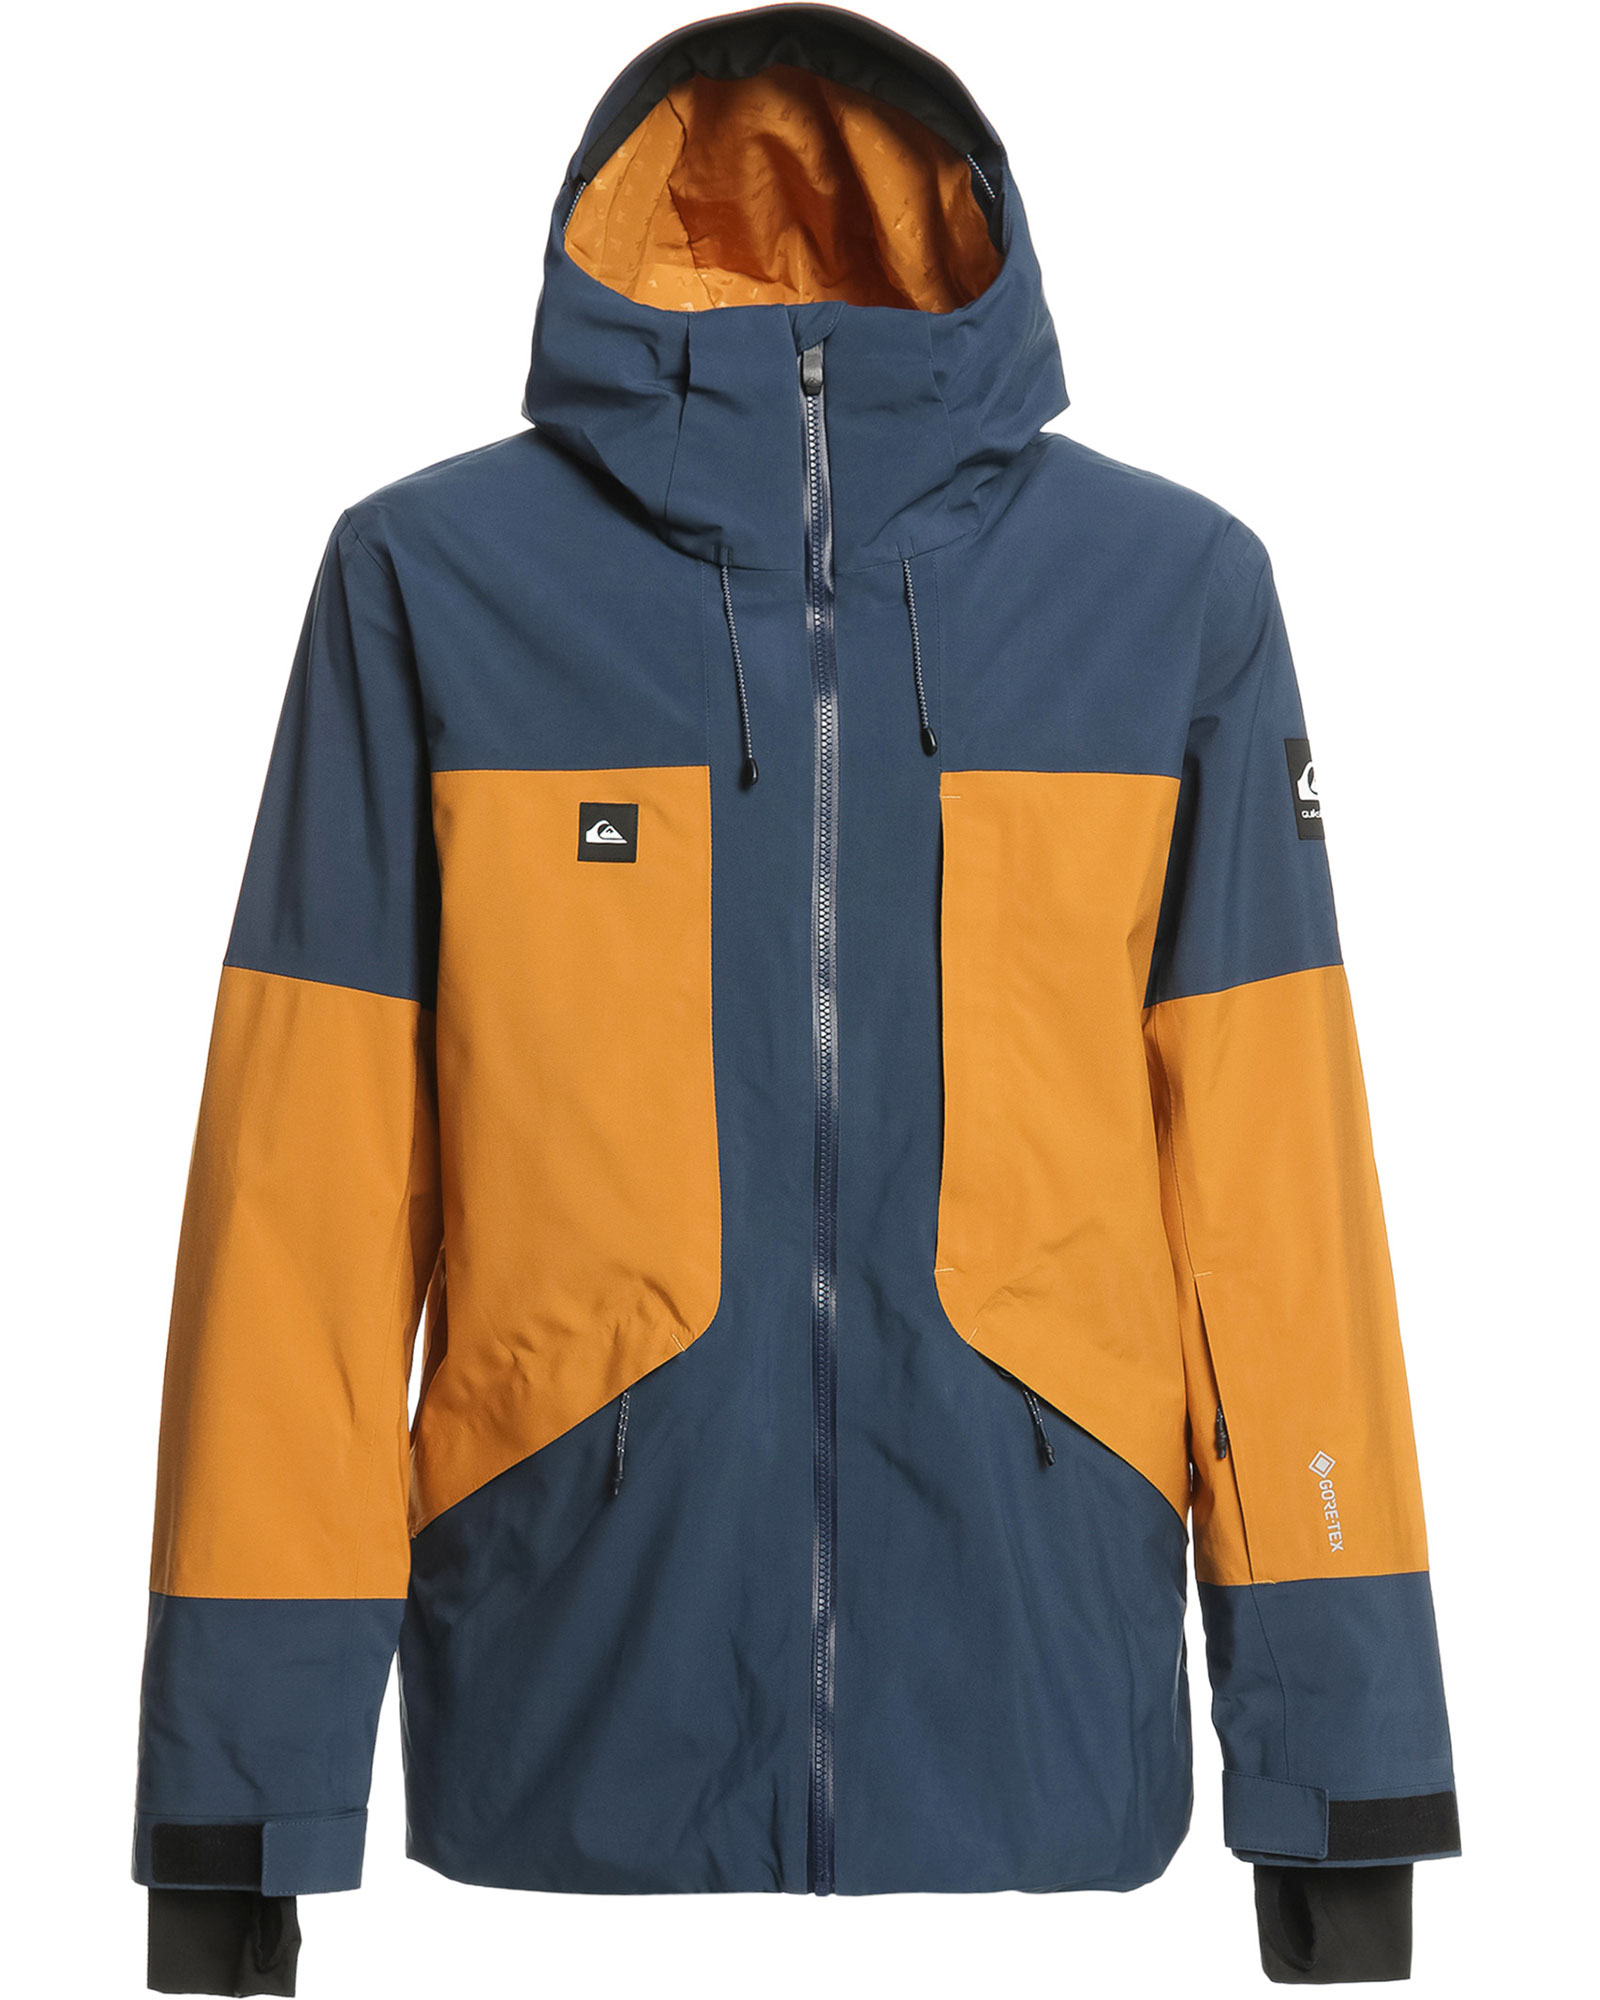 Quiksilver Forever Stretch GORE TEX Insulated Men’s Jacket - Insignia Blue XL